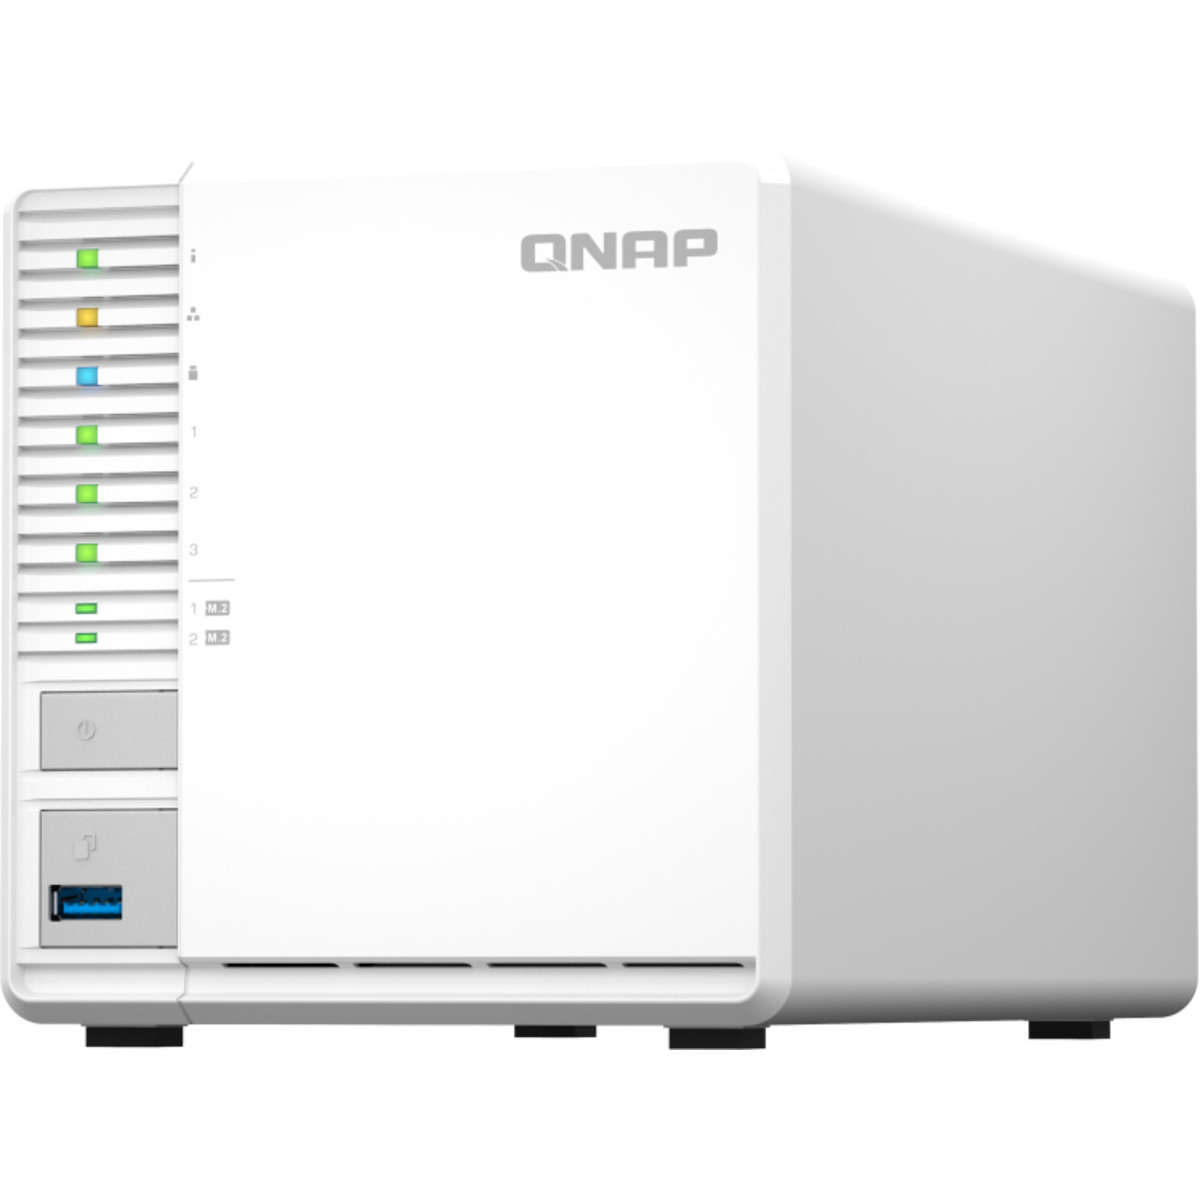 QNAP TS-364 16tb 3-Bay Desktop Multimedia / Power User / Business NAS - Network Attached Storage Device 2x8tb TeamGroup EX2 Elite T253E2008T0C101 2.5 550/520MB/s SATA 6Gb/s SSD CONSUMER Class Drives Installed - Burn-In Tested TS-364